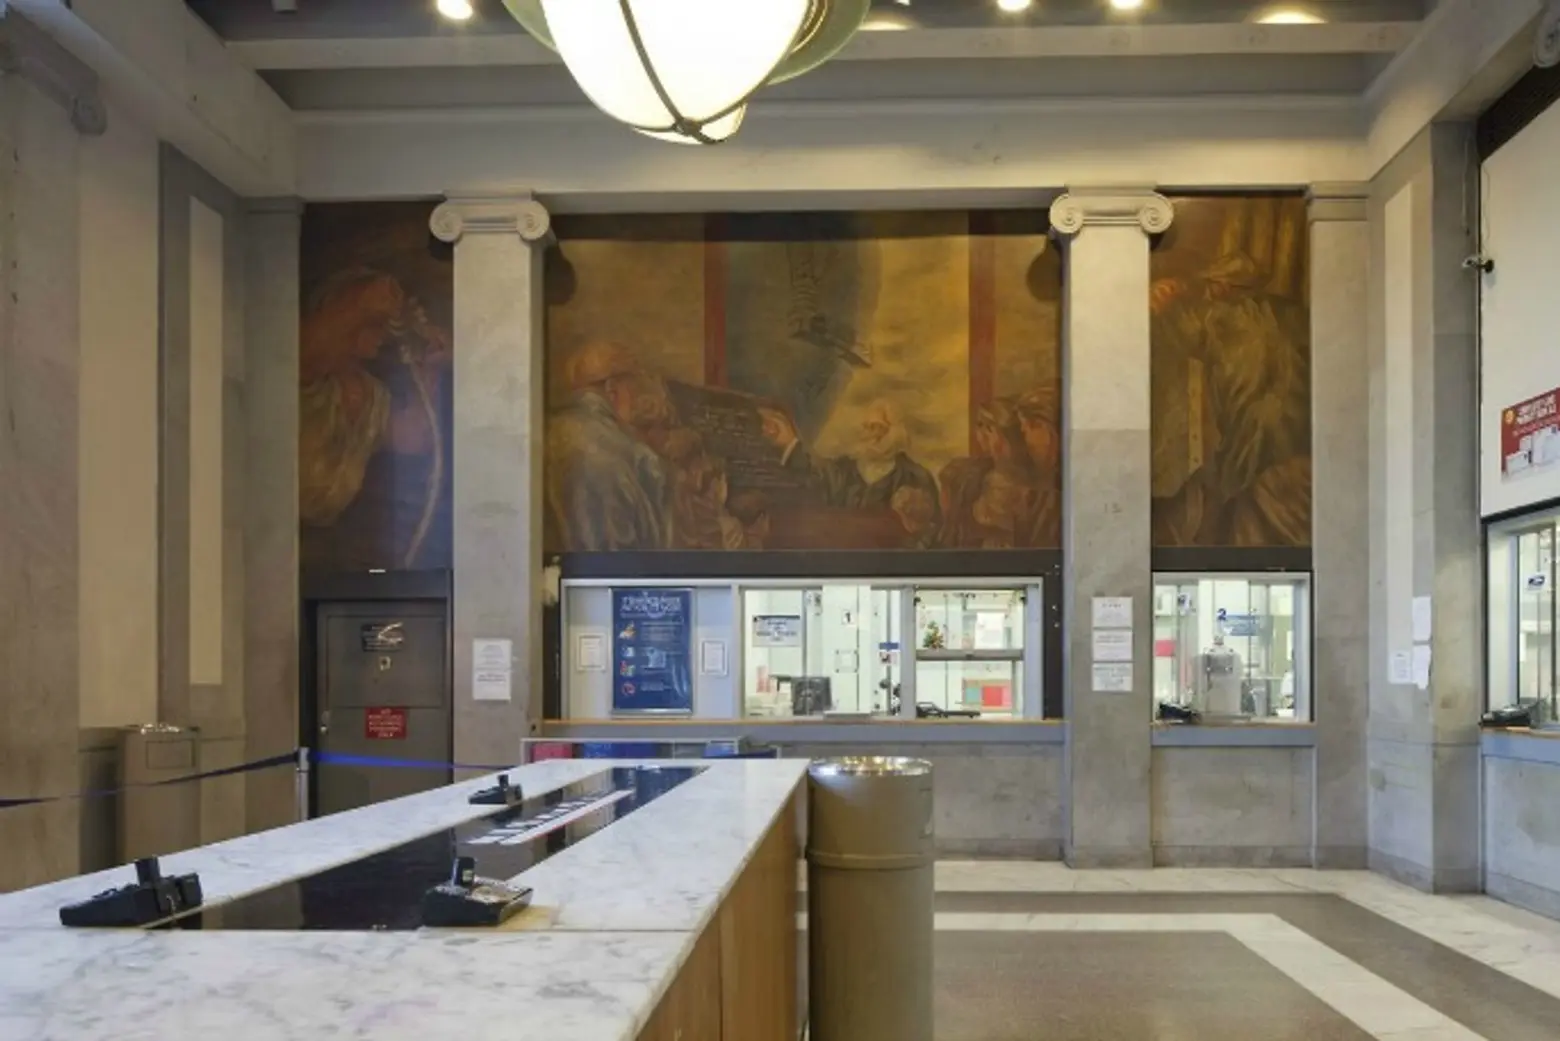 Ben Shahn Murals and a Market? YoungWoo & Associates Tries Again at the Bronx General Post Office